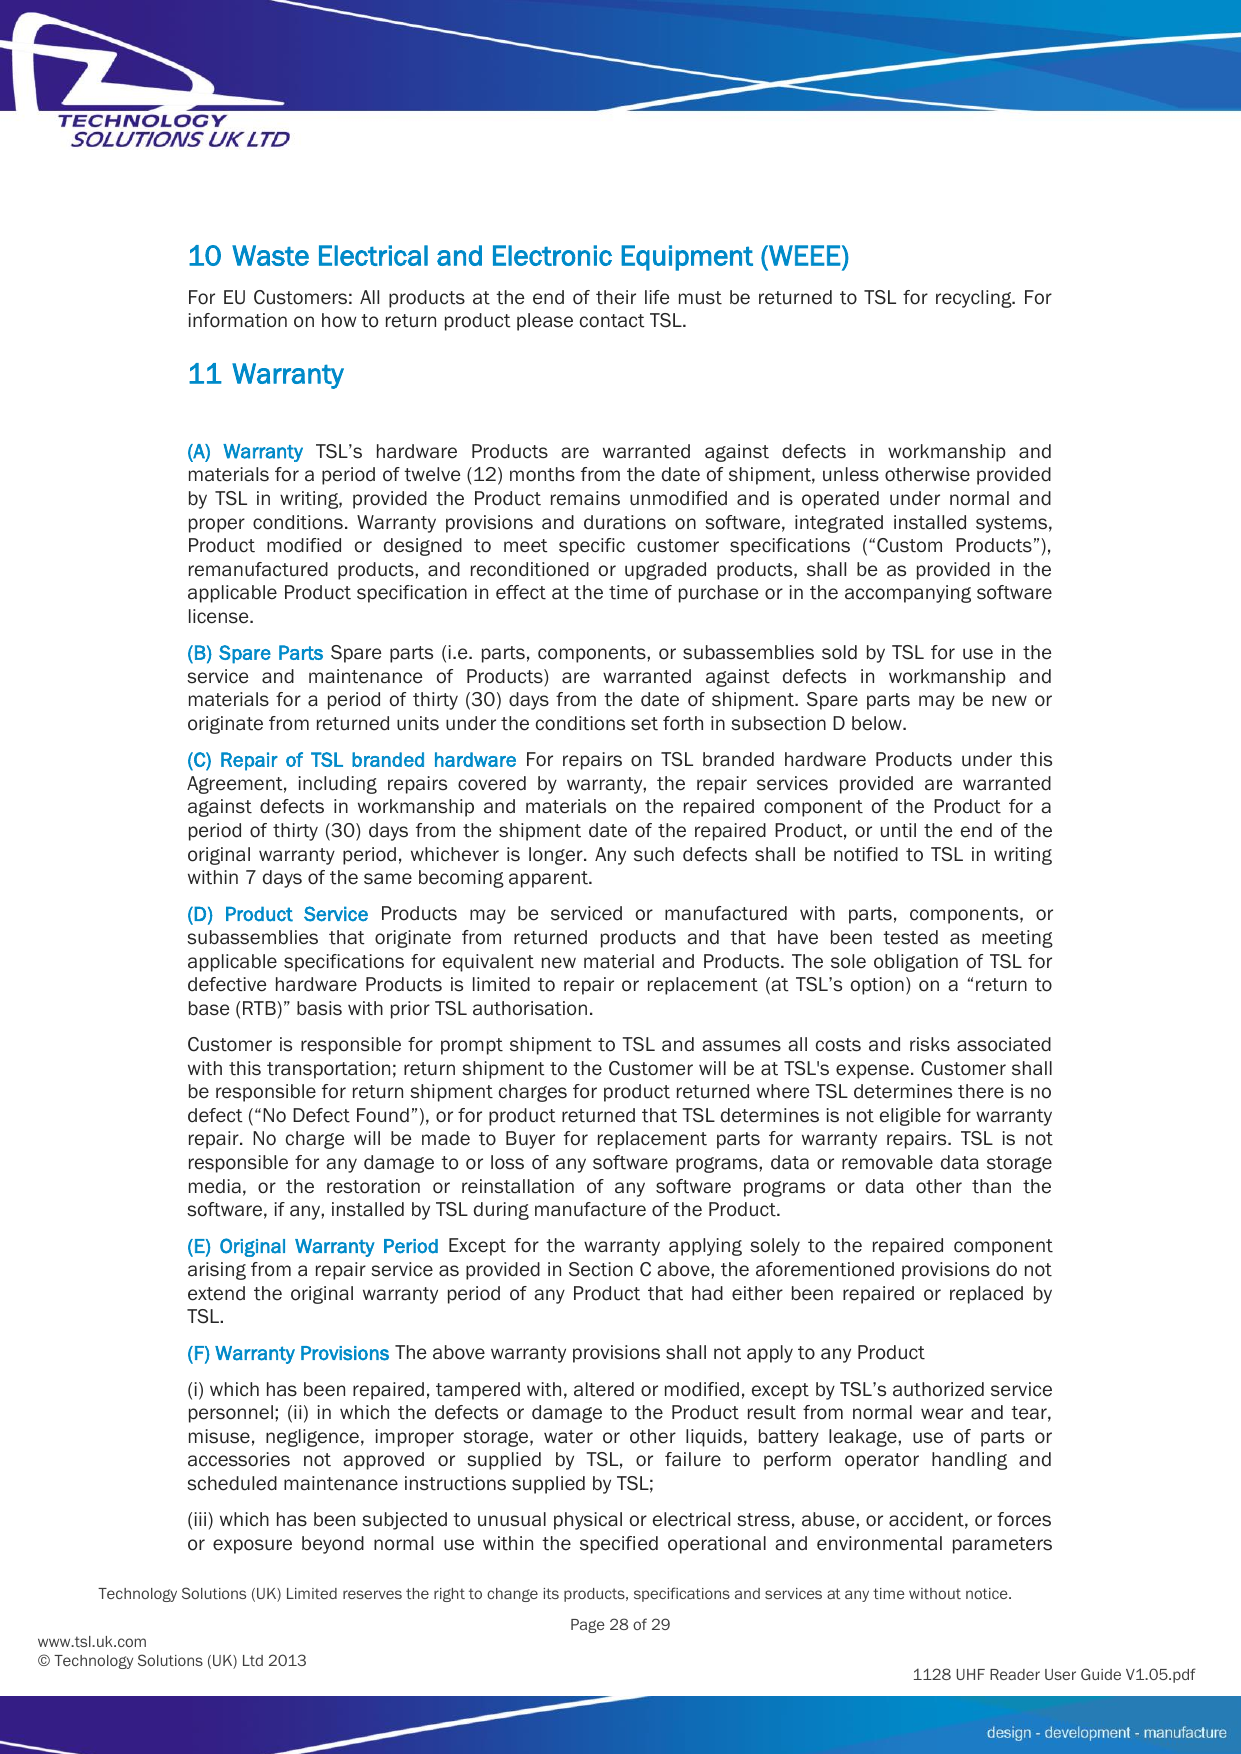          Technology Solutions (UK) Limited reserves the right to change its products, specifications and services at any time without notice.   Page 28 of 29 1128 UHF Reader User Guide V1.05.pdf www.tsl.uk.com © Technology Solutions (UK) Ltd 2013  10 Waste Electrical and Electronic Equipment (WEEE) For EU Customers: All products at the end of their life must be returned to TSL for recycling. For information on how to return product please contact TSL. 11 Warranty  (A)  Warranty  TSL’s  hardware  Products  are  warranted  against  defects  in  workmanship  and materials for a period of twelve (12) months from the date of shipment, unless otherwise provided by  TSL  in  writing,  provided  the  Product  remains  unmodified  and  is  operated  under  normal  and proper  conditions.  Warranty  provisions  and  durations  on  software,  integrated  installed  systems, Product  modified  or  designed  to  meet  specific  customer  specifications  (“Custom  Products”), remanufactured  products,  and  reconditioned  or  upgraded  products,  shall  be  as  provided  in  the applicable Product specification in effect at the time of purchase or in the accompanying software license. (B) Spare Parts Spare parts (i.e. parts, components, or subassemblies sold by TSL for use in the service  and  maintenance  of  Products)  are  warranted  against  defects  in  workmanship  and materials for  a  period of thirty (30)  days from  the date of  shipment. Spare  parts may be new  or originate from returned units under the conditions set forth in subsection D below. (C)  Repair  of  TSL  branded  hardware  For  repairs  on  TSL  branded  hardware  Products  under  this Agreement,  including  repairs  covered  by  warranty,  the  repair  services  provided  are  warranted against  defects  in  workmanship  and  materials  on  the  repaired  component  of  the  Product  for  a period of thirty (30) days from the shipment date of the repaired Product, or until the end of the original warranty period,  whichever is longer.  Any such defects shall  be notified  to TSL  in writing within 7 days of the same becoming apparent. (D)  Product  Service  Products  may  be  serviced  or  manufactured  with  parts,  components,  or subassemblies  that  originate  from  returned  products  and  that  have  been  tested  as  meeting applicable specifications for equivalent new material and Products. The sole obligation of TSL for defective hardware Products is limited to repair or replacement (at TSL’s option) on a “return to base (RTB)” basis with prior TSL authorisation. Customer is responsible for prompt shipment to TSL and assumes all costs and risks associated with this transportation; return shipment to the Customer will be at TSL&apos;s expense. Customer shall be responsible for return shipment charges for product returned where TSL determines there is no defect (“No Defect Found”), or for product returned that TSL determines is not eligible for warranty repair.  No  charge  will  be  made  to  Buyer  for  replacement  parts  for  warranty  repairs.  TSL  is  not responsible for any damage to or loss of any software programs, data or removable data storage media,  or  the  restoration  or  reinstallation  of  any  software  programs  or  data  other  than  the software, if any, installed by TSL during manufacture of the Product. (E)  Original  Warranty  Period  Except  for  the  warranty  applying  solely  to  the  repaired  component arising from a repair service as provided in Section C above, the aforementioned provisions do not extend  the  original  warranty  period  of  any  Product  that  had  either  been  repaired  or  replaced  by TSL. (F) Warranty Provisions The above warranty provisions shall not apply to any Product (i) which has been repaired, tampered with, altered or modified, except by TSL’s authorized service personnel; (ii) in  which the defects or damage  to  the  Product  result  from normal  wear and  tear, misuse,  negligence,  improper  storage,  water  or  other  liquids,  battery  leakage,  use  of  parts  or accessories  not  approved  or  supplied  by  TSL,  or  failure  to  perform  operator  handling  and scheduled maintenance instructions supplied by TSL; (iii) which has been subjected to unusual physical or electrical stress, abuse, or accident, or forces or  exposure  beyond  normal  use  within  the  specified  operational  and  environmental  parameters 